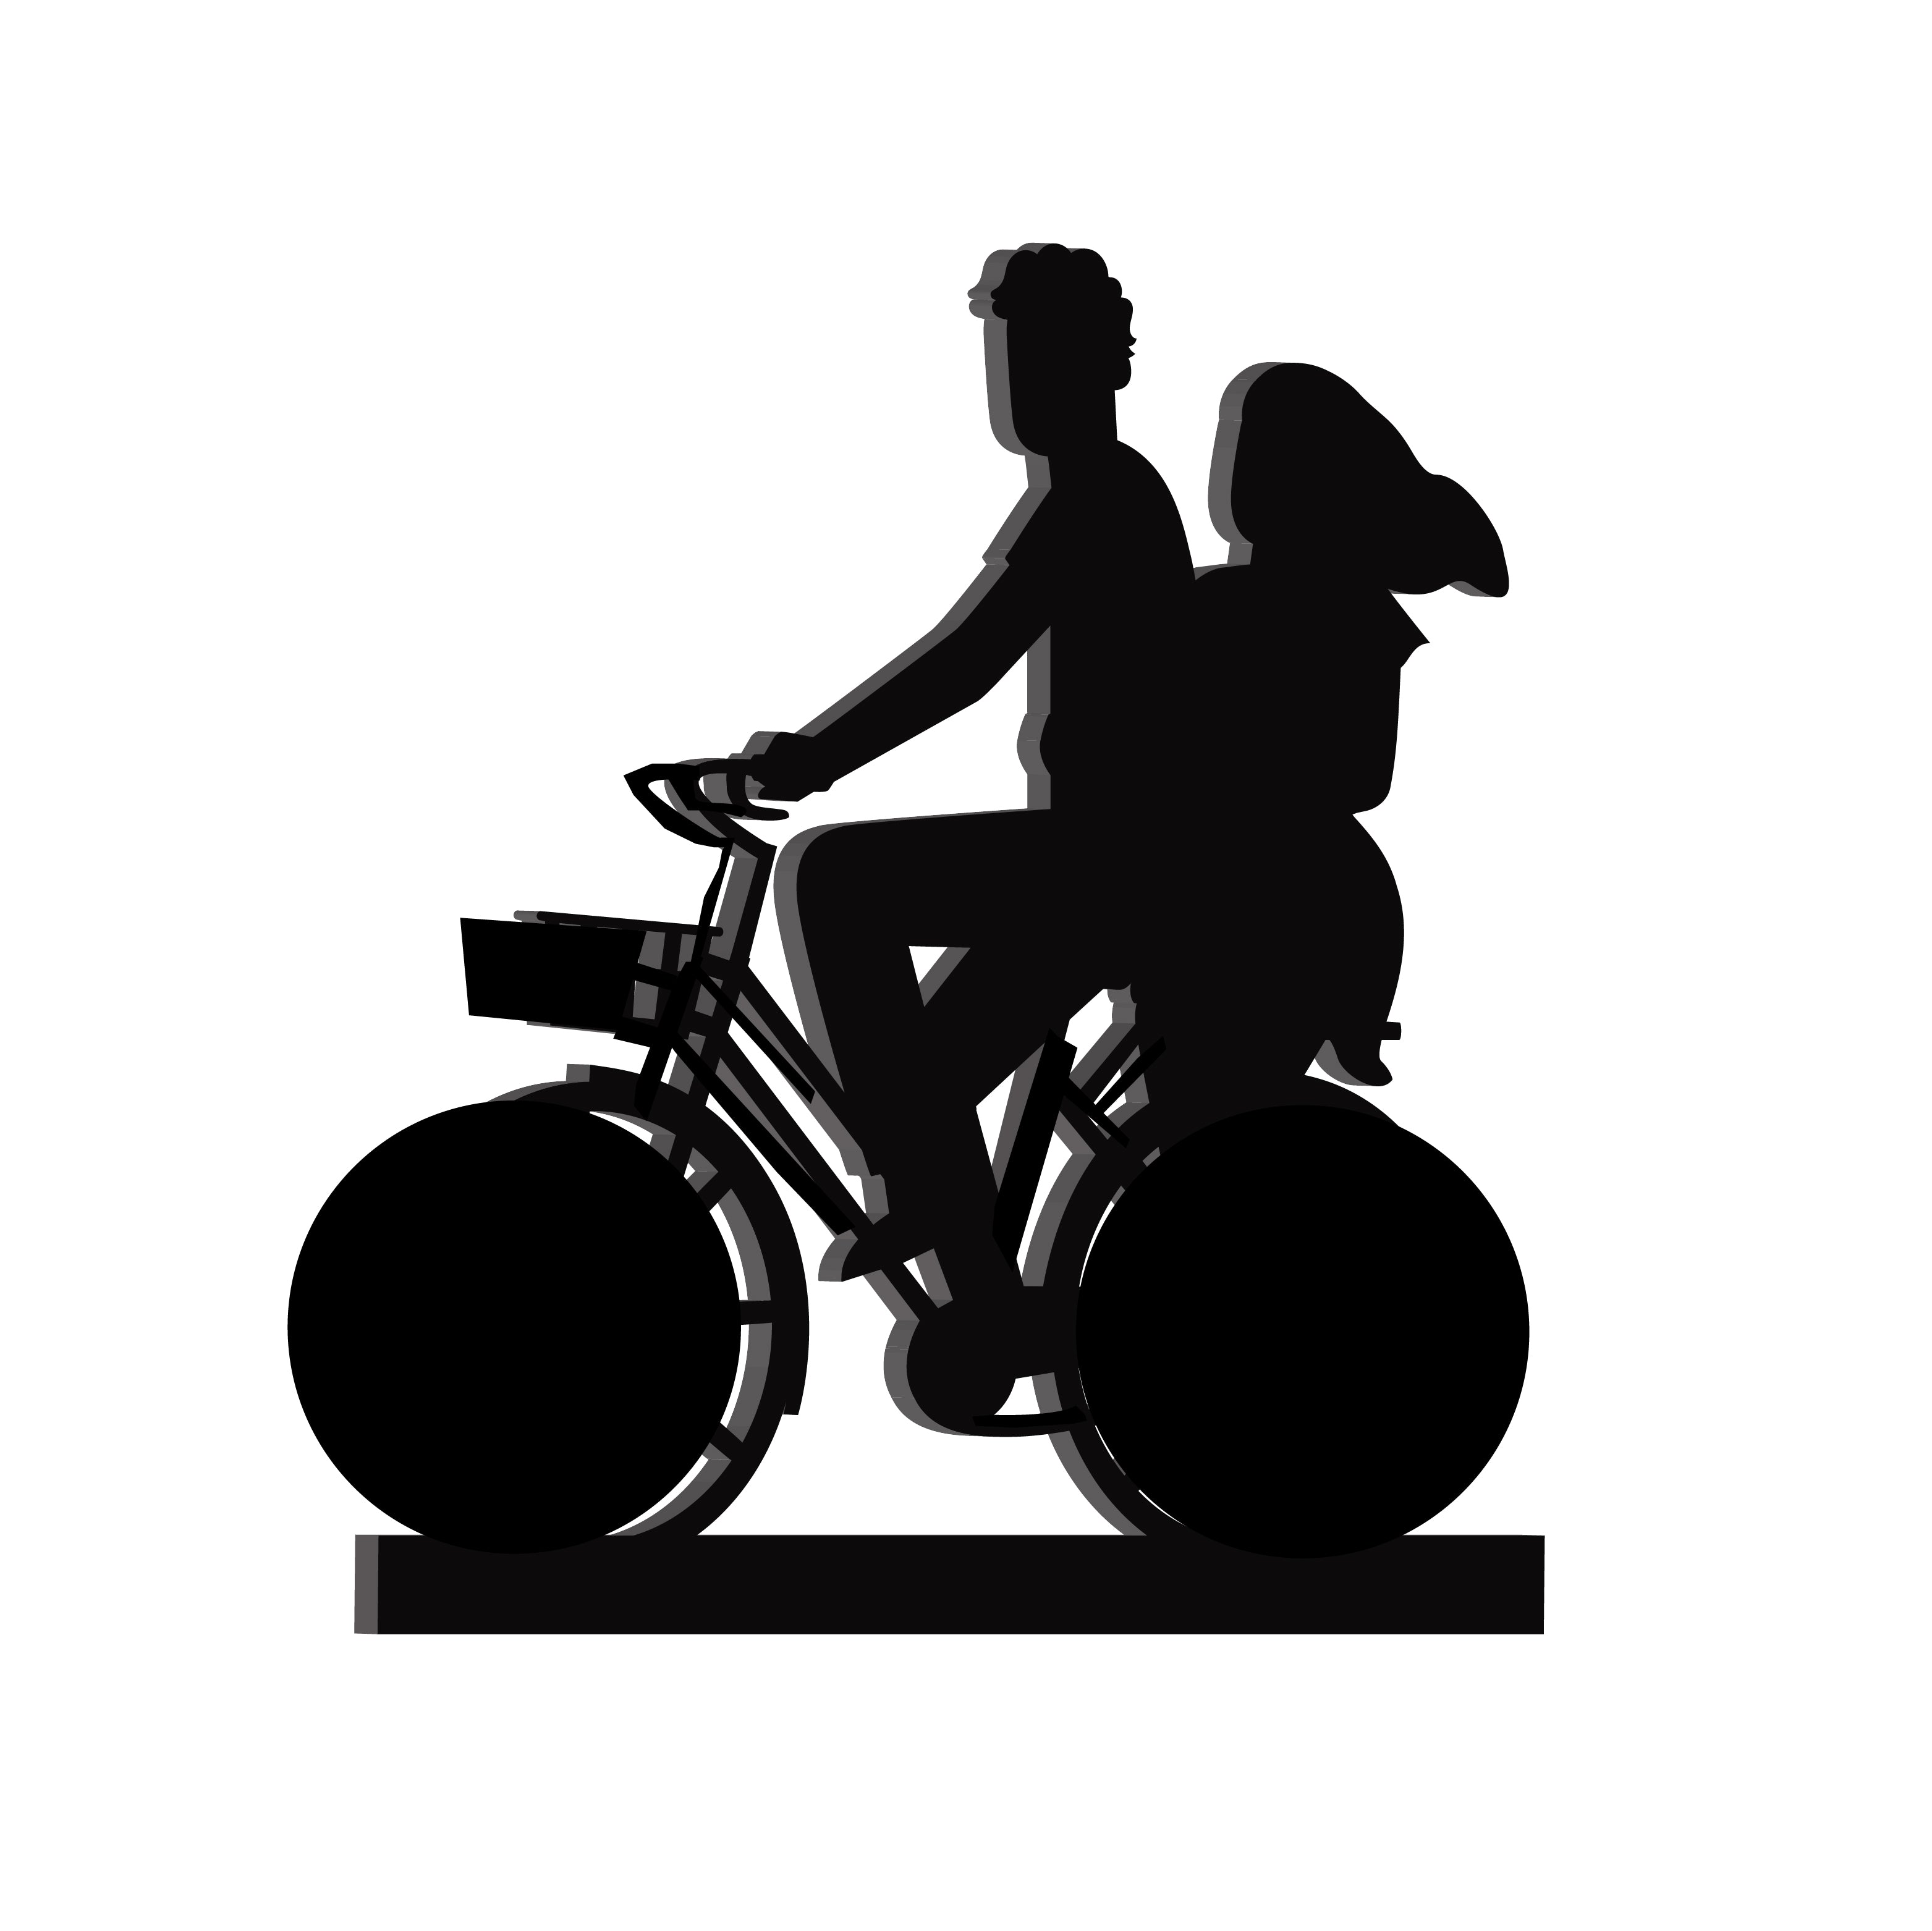 Couple On Cycle Black Engineered Wood Wall Art Cutout, Ready To Hang Home Decor 4